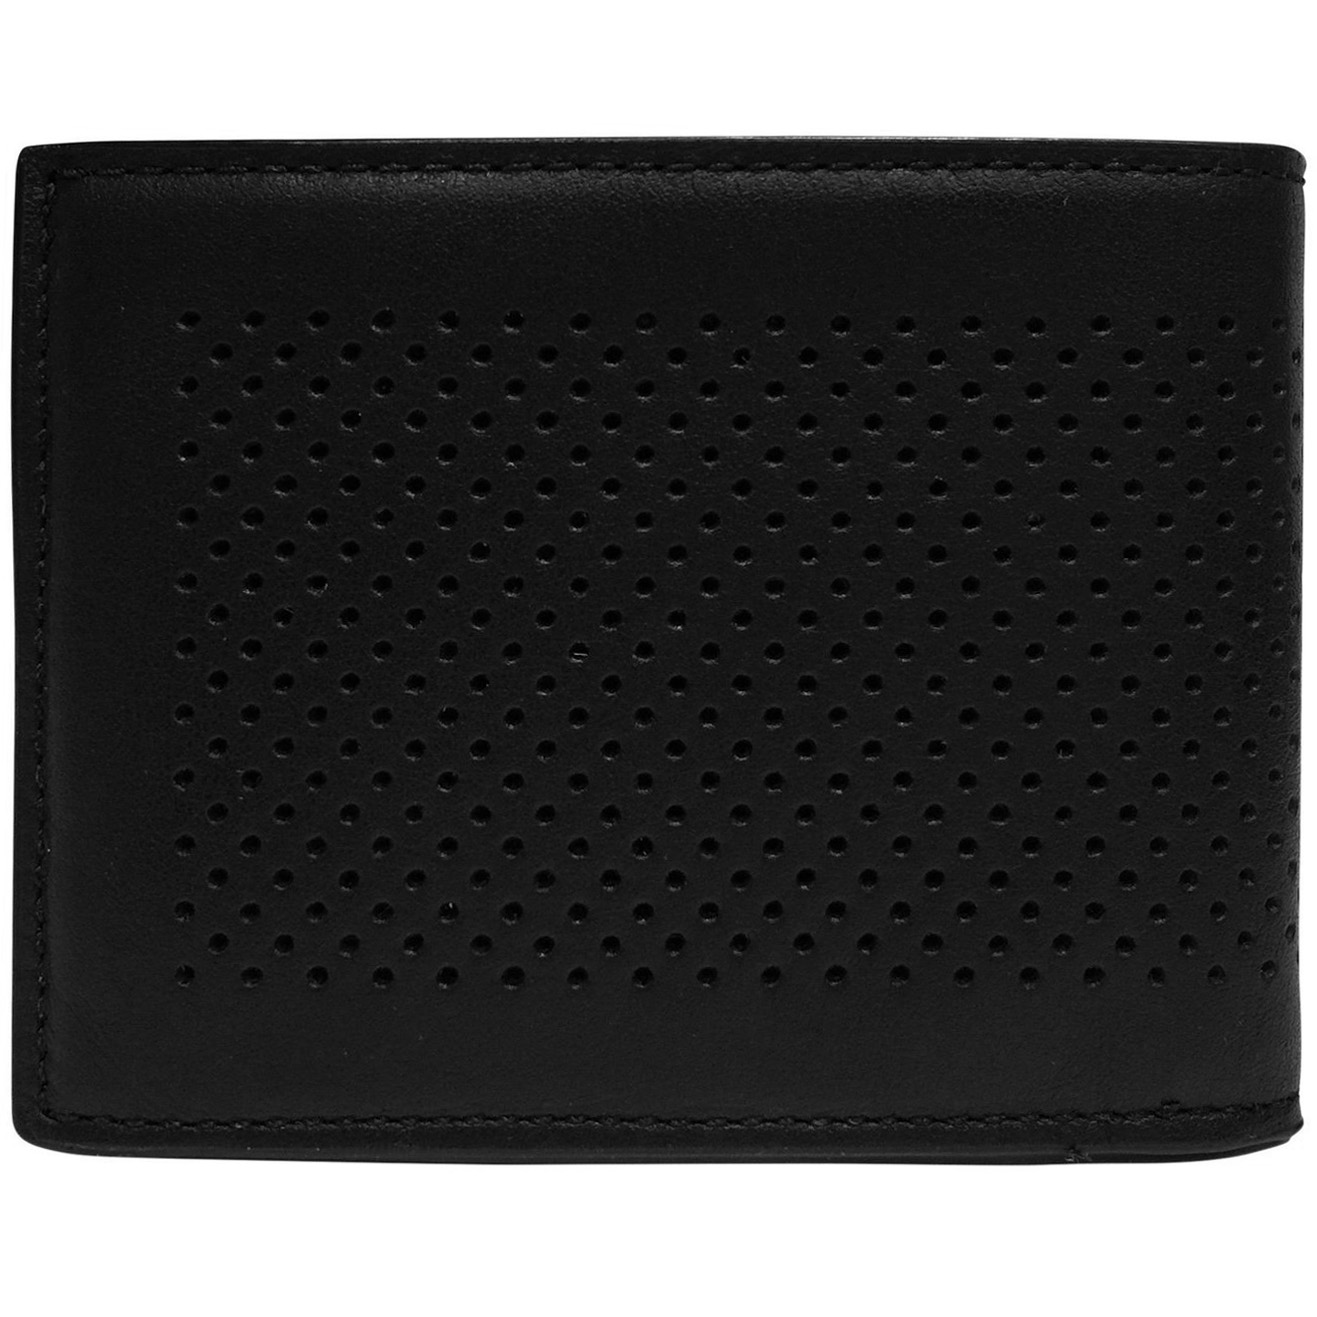 Coach Men Slim Billfold Id Wallet In Perforated Leather Black # F75227